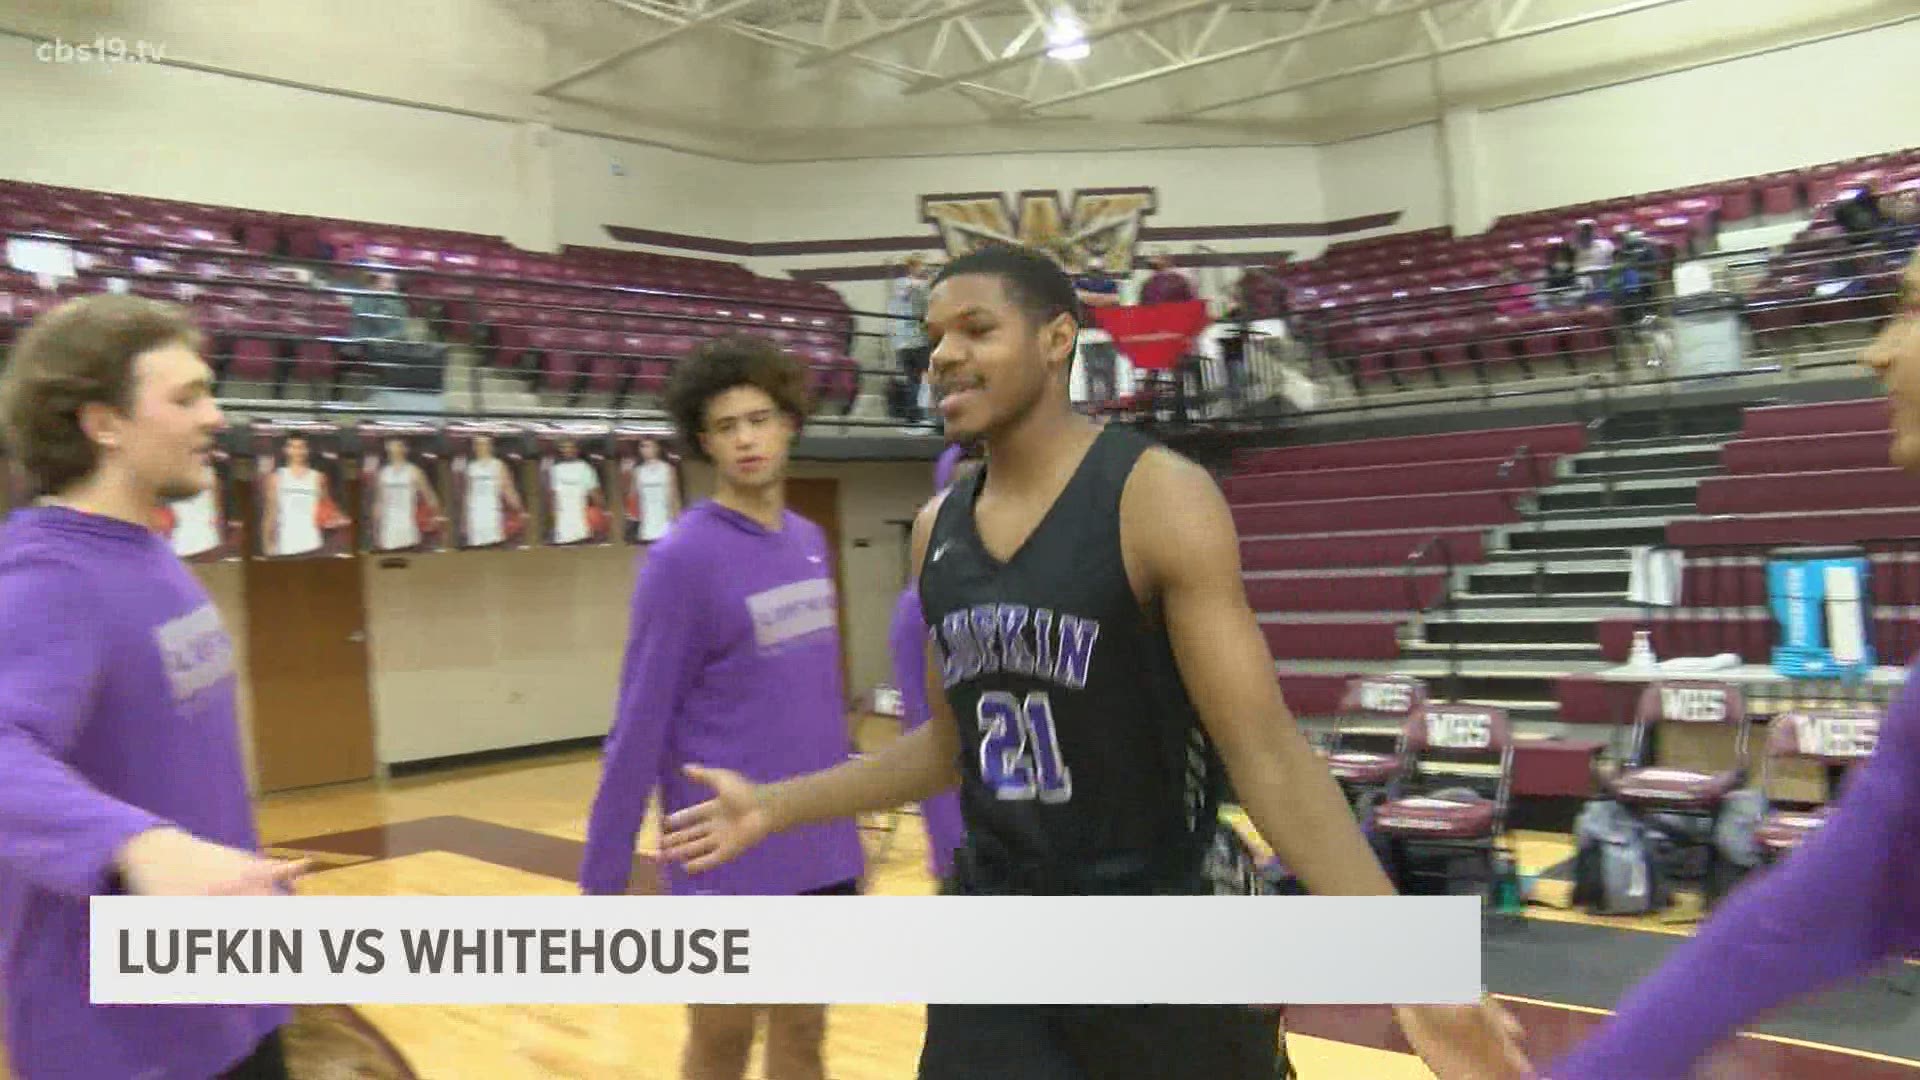 Lufkin beats Whitehouse in 5A action 54-49.